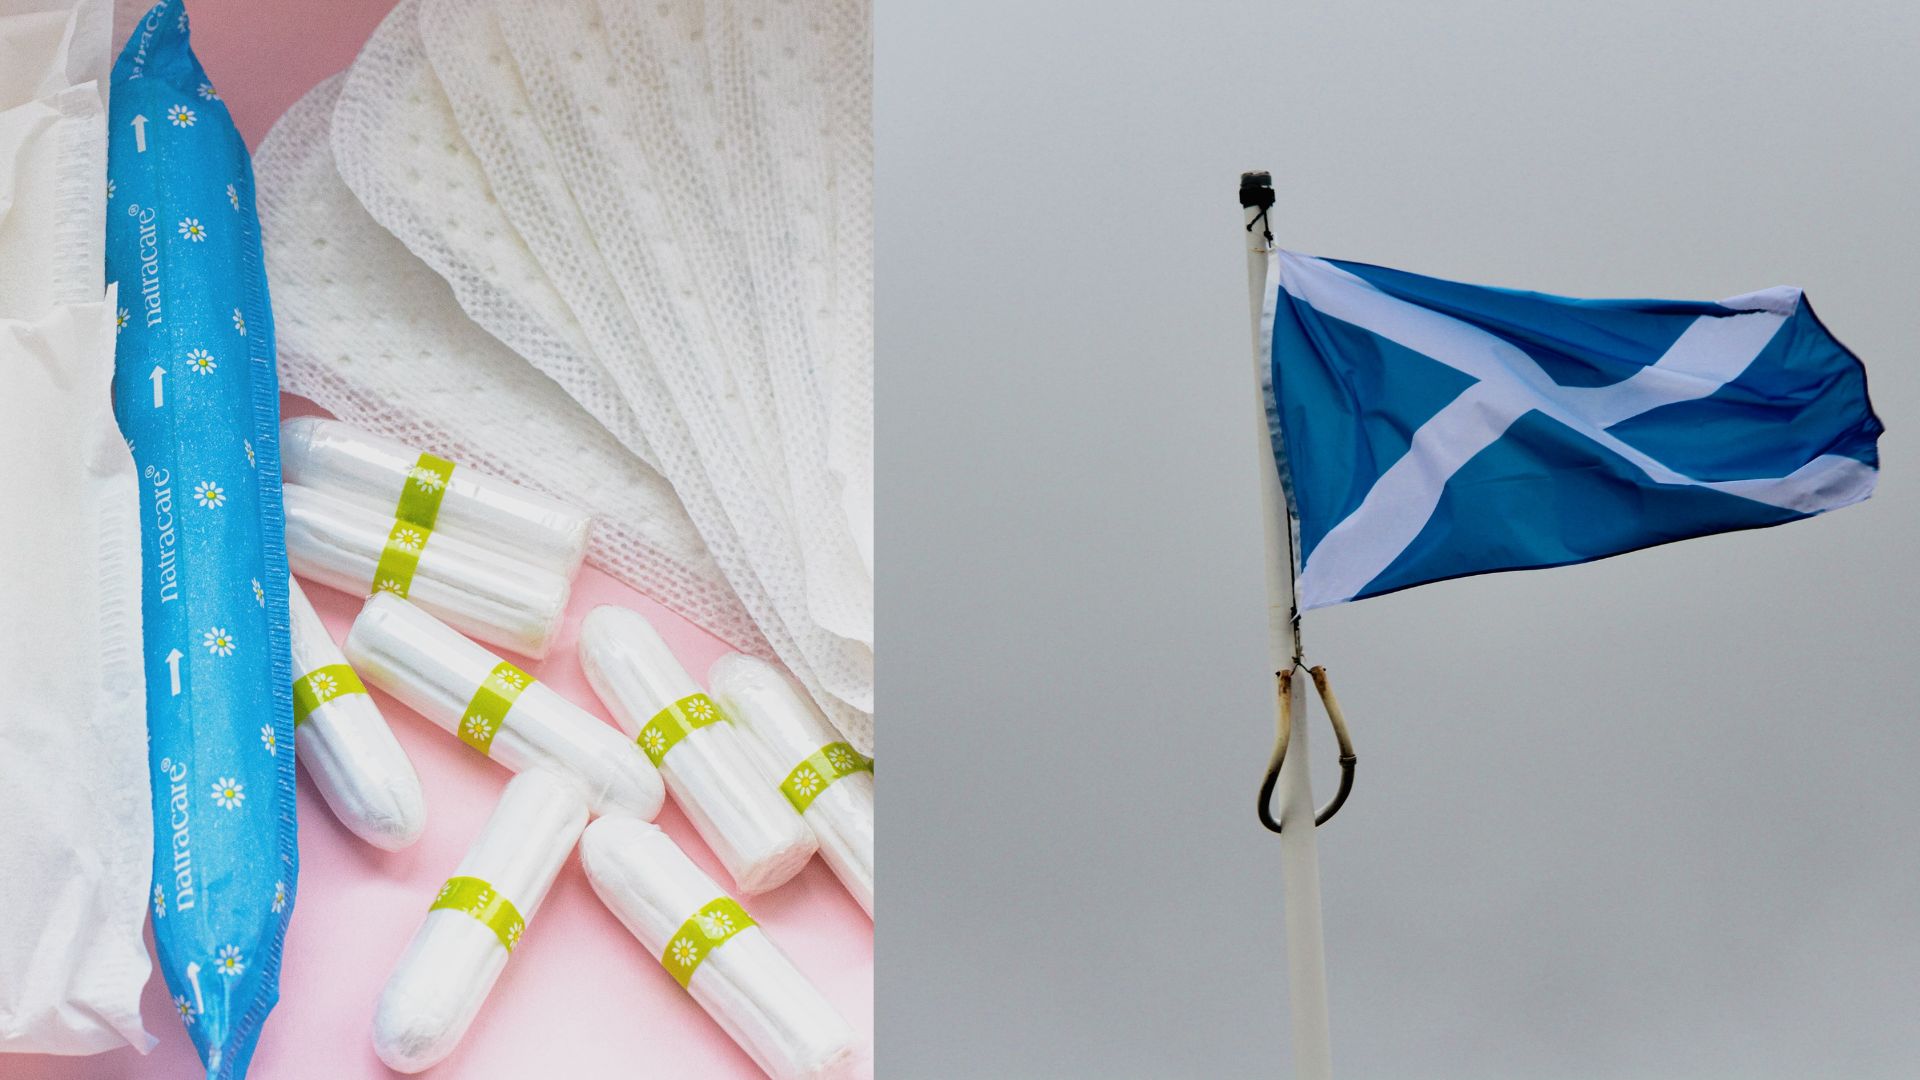 Now, menstruation products should be freely distributed to the public in Scotland, according to a new law. 